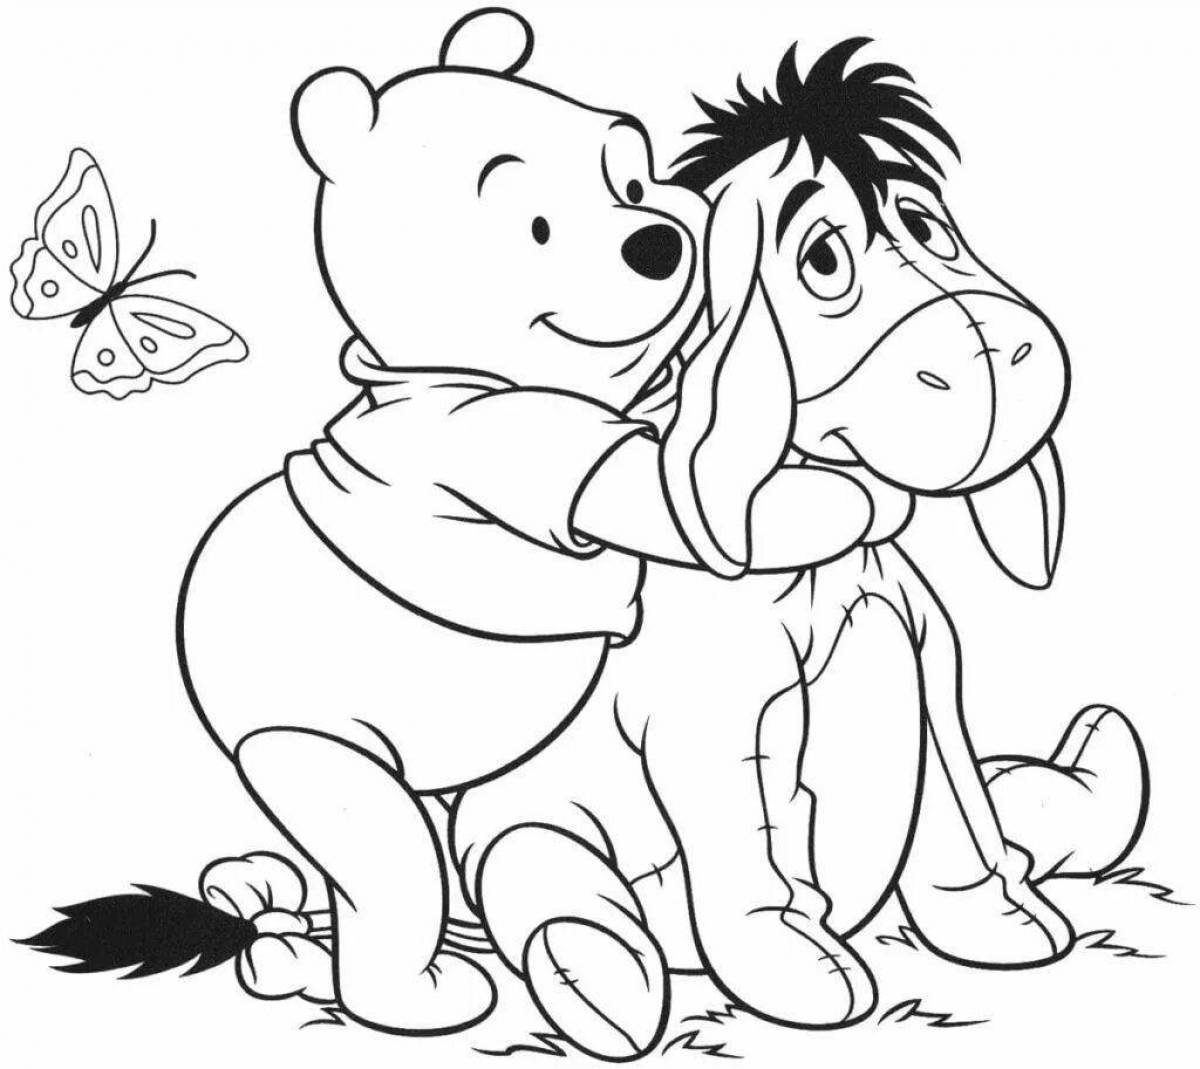 Coloring book with bright cartoon characters for children 4-5 years old